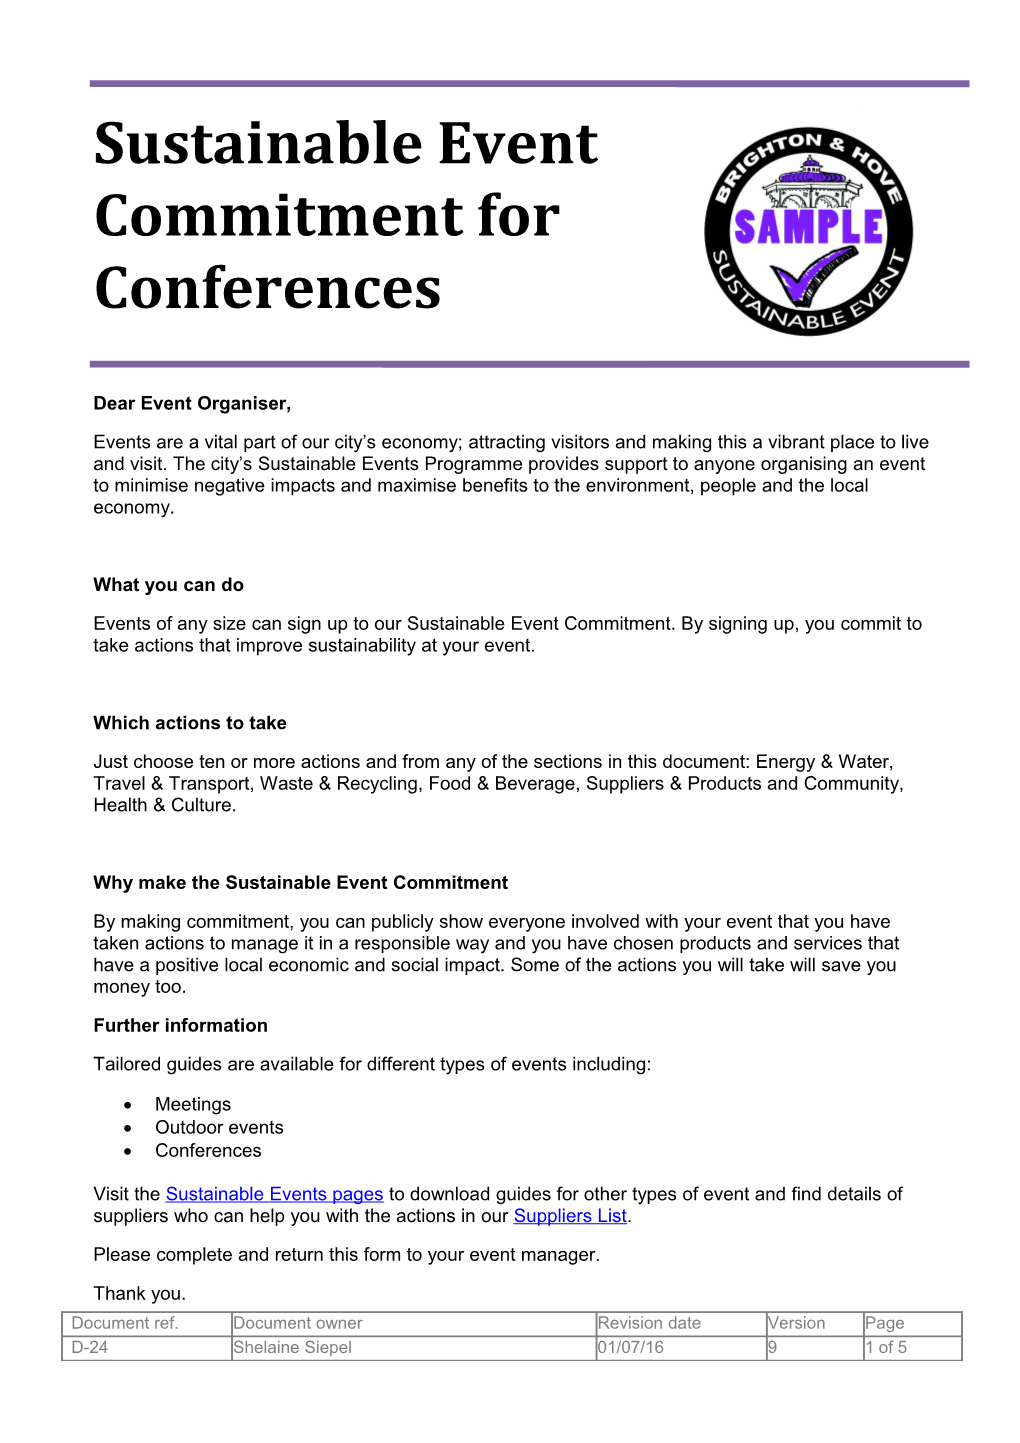 Sustainable Event Commitment for Conferences